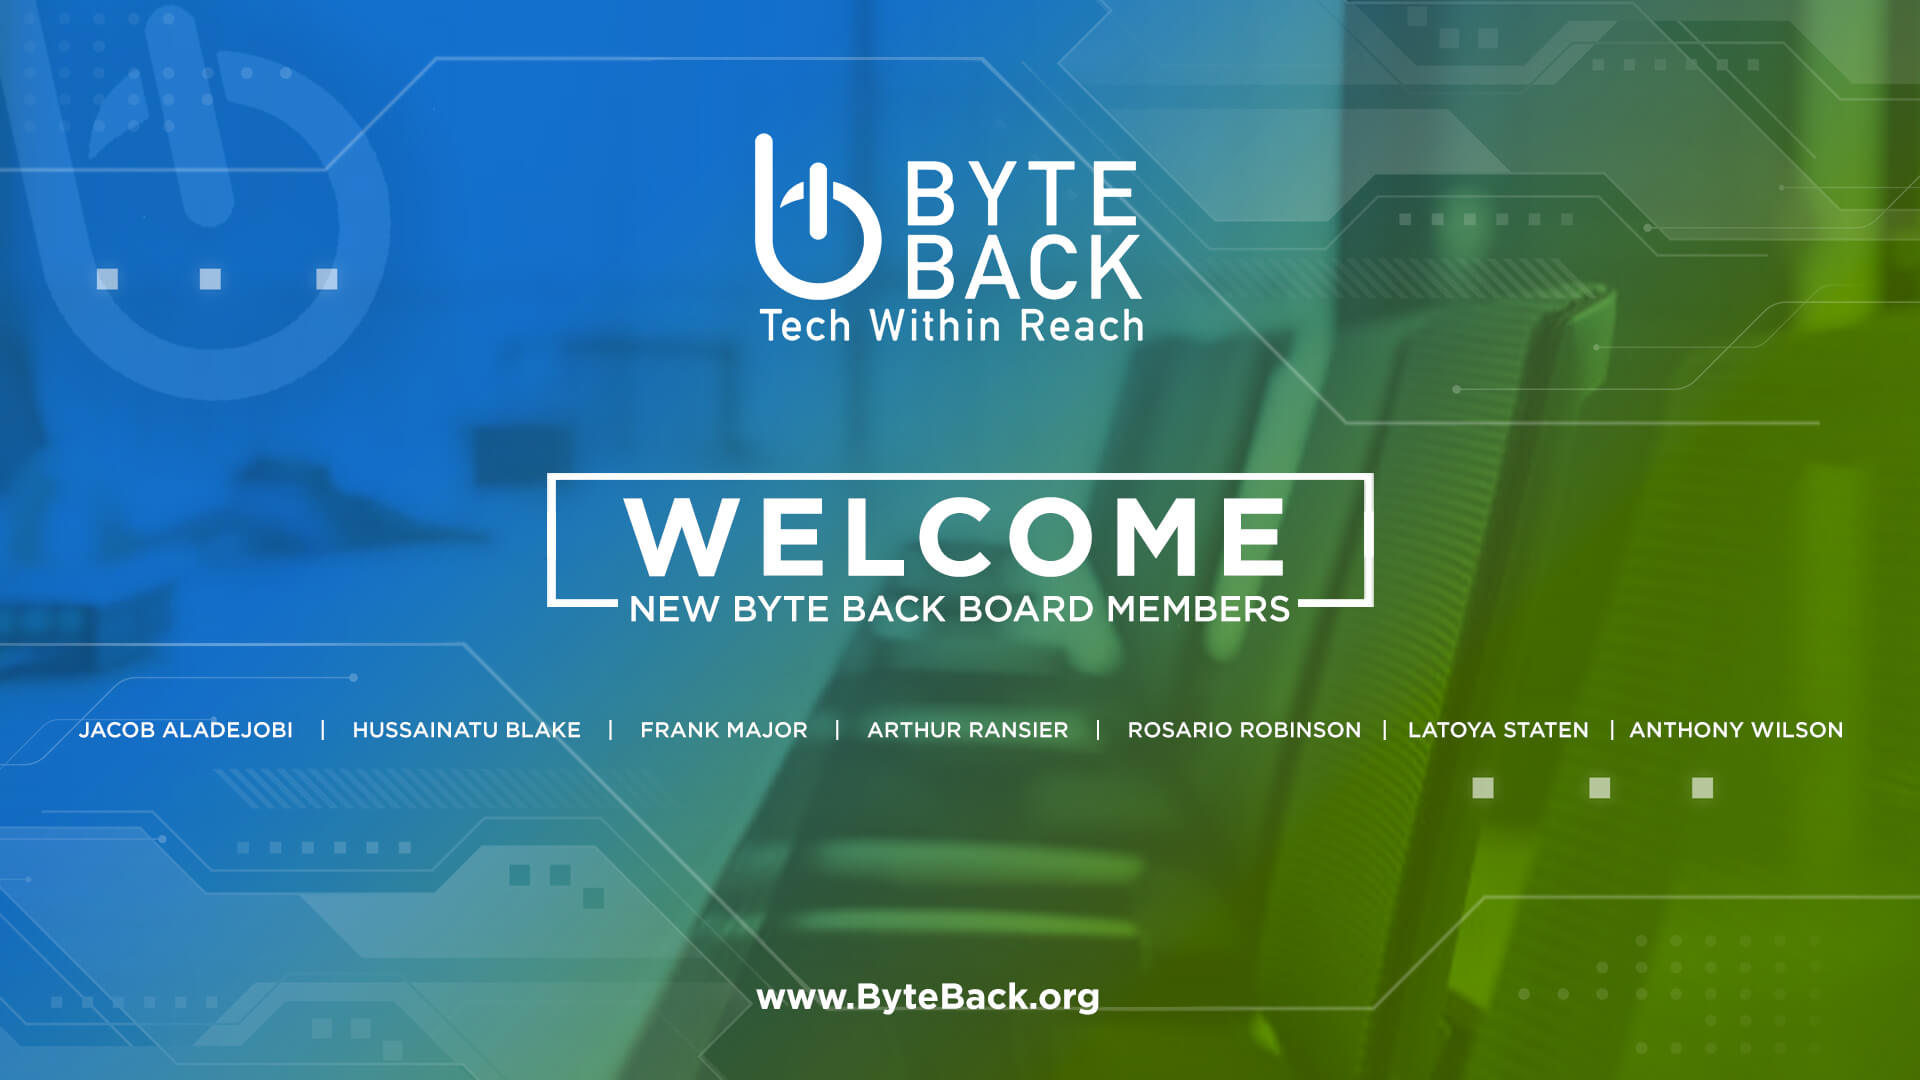 7 New Board Members Join Byte Back in Efforts to Close Digital Divide